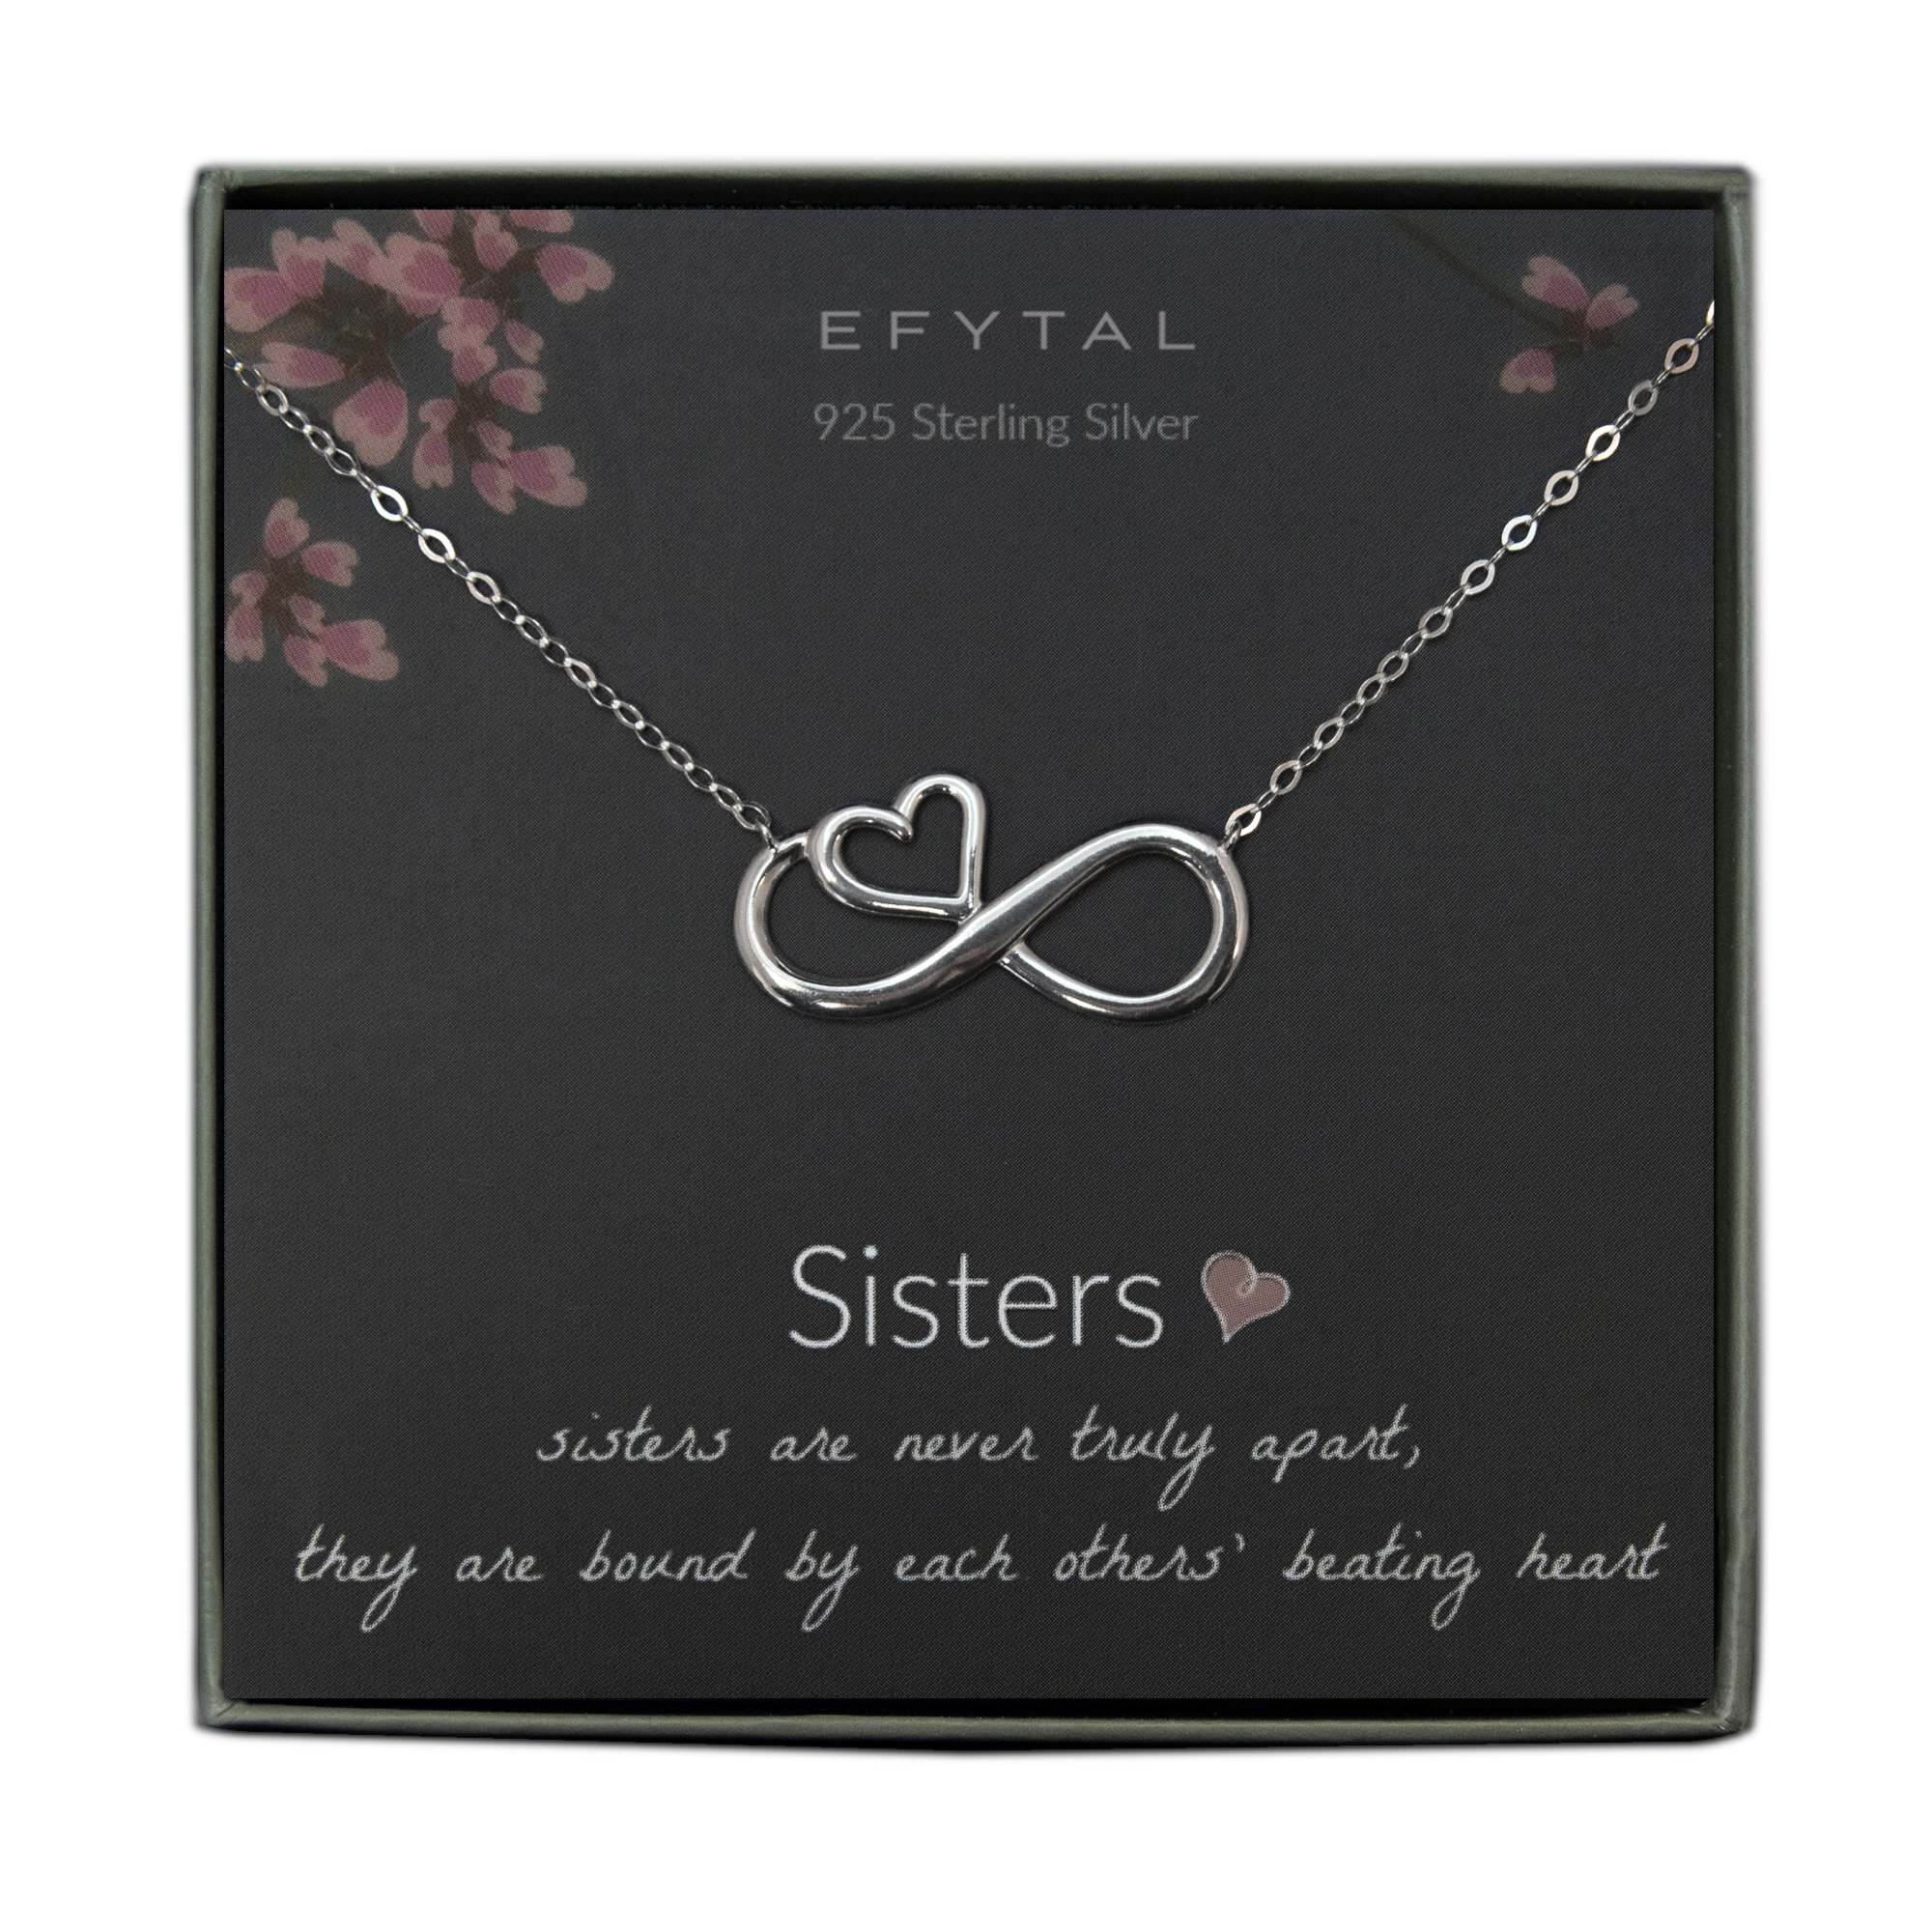 Jewelry -rings, necklaces, bracelets, earrings - The Sister's